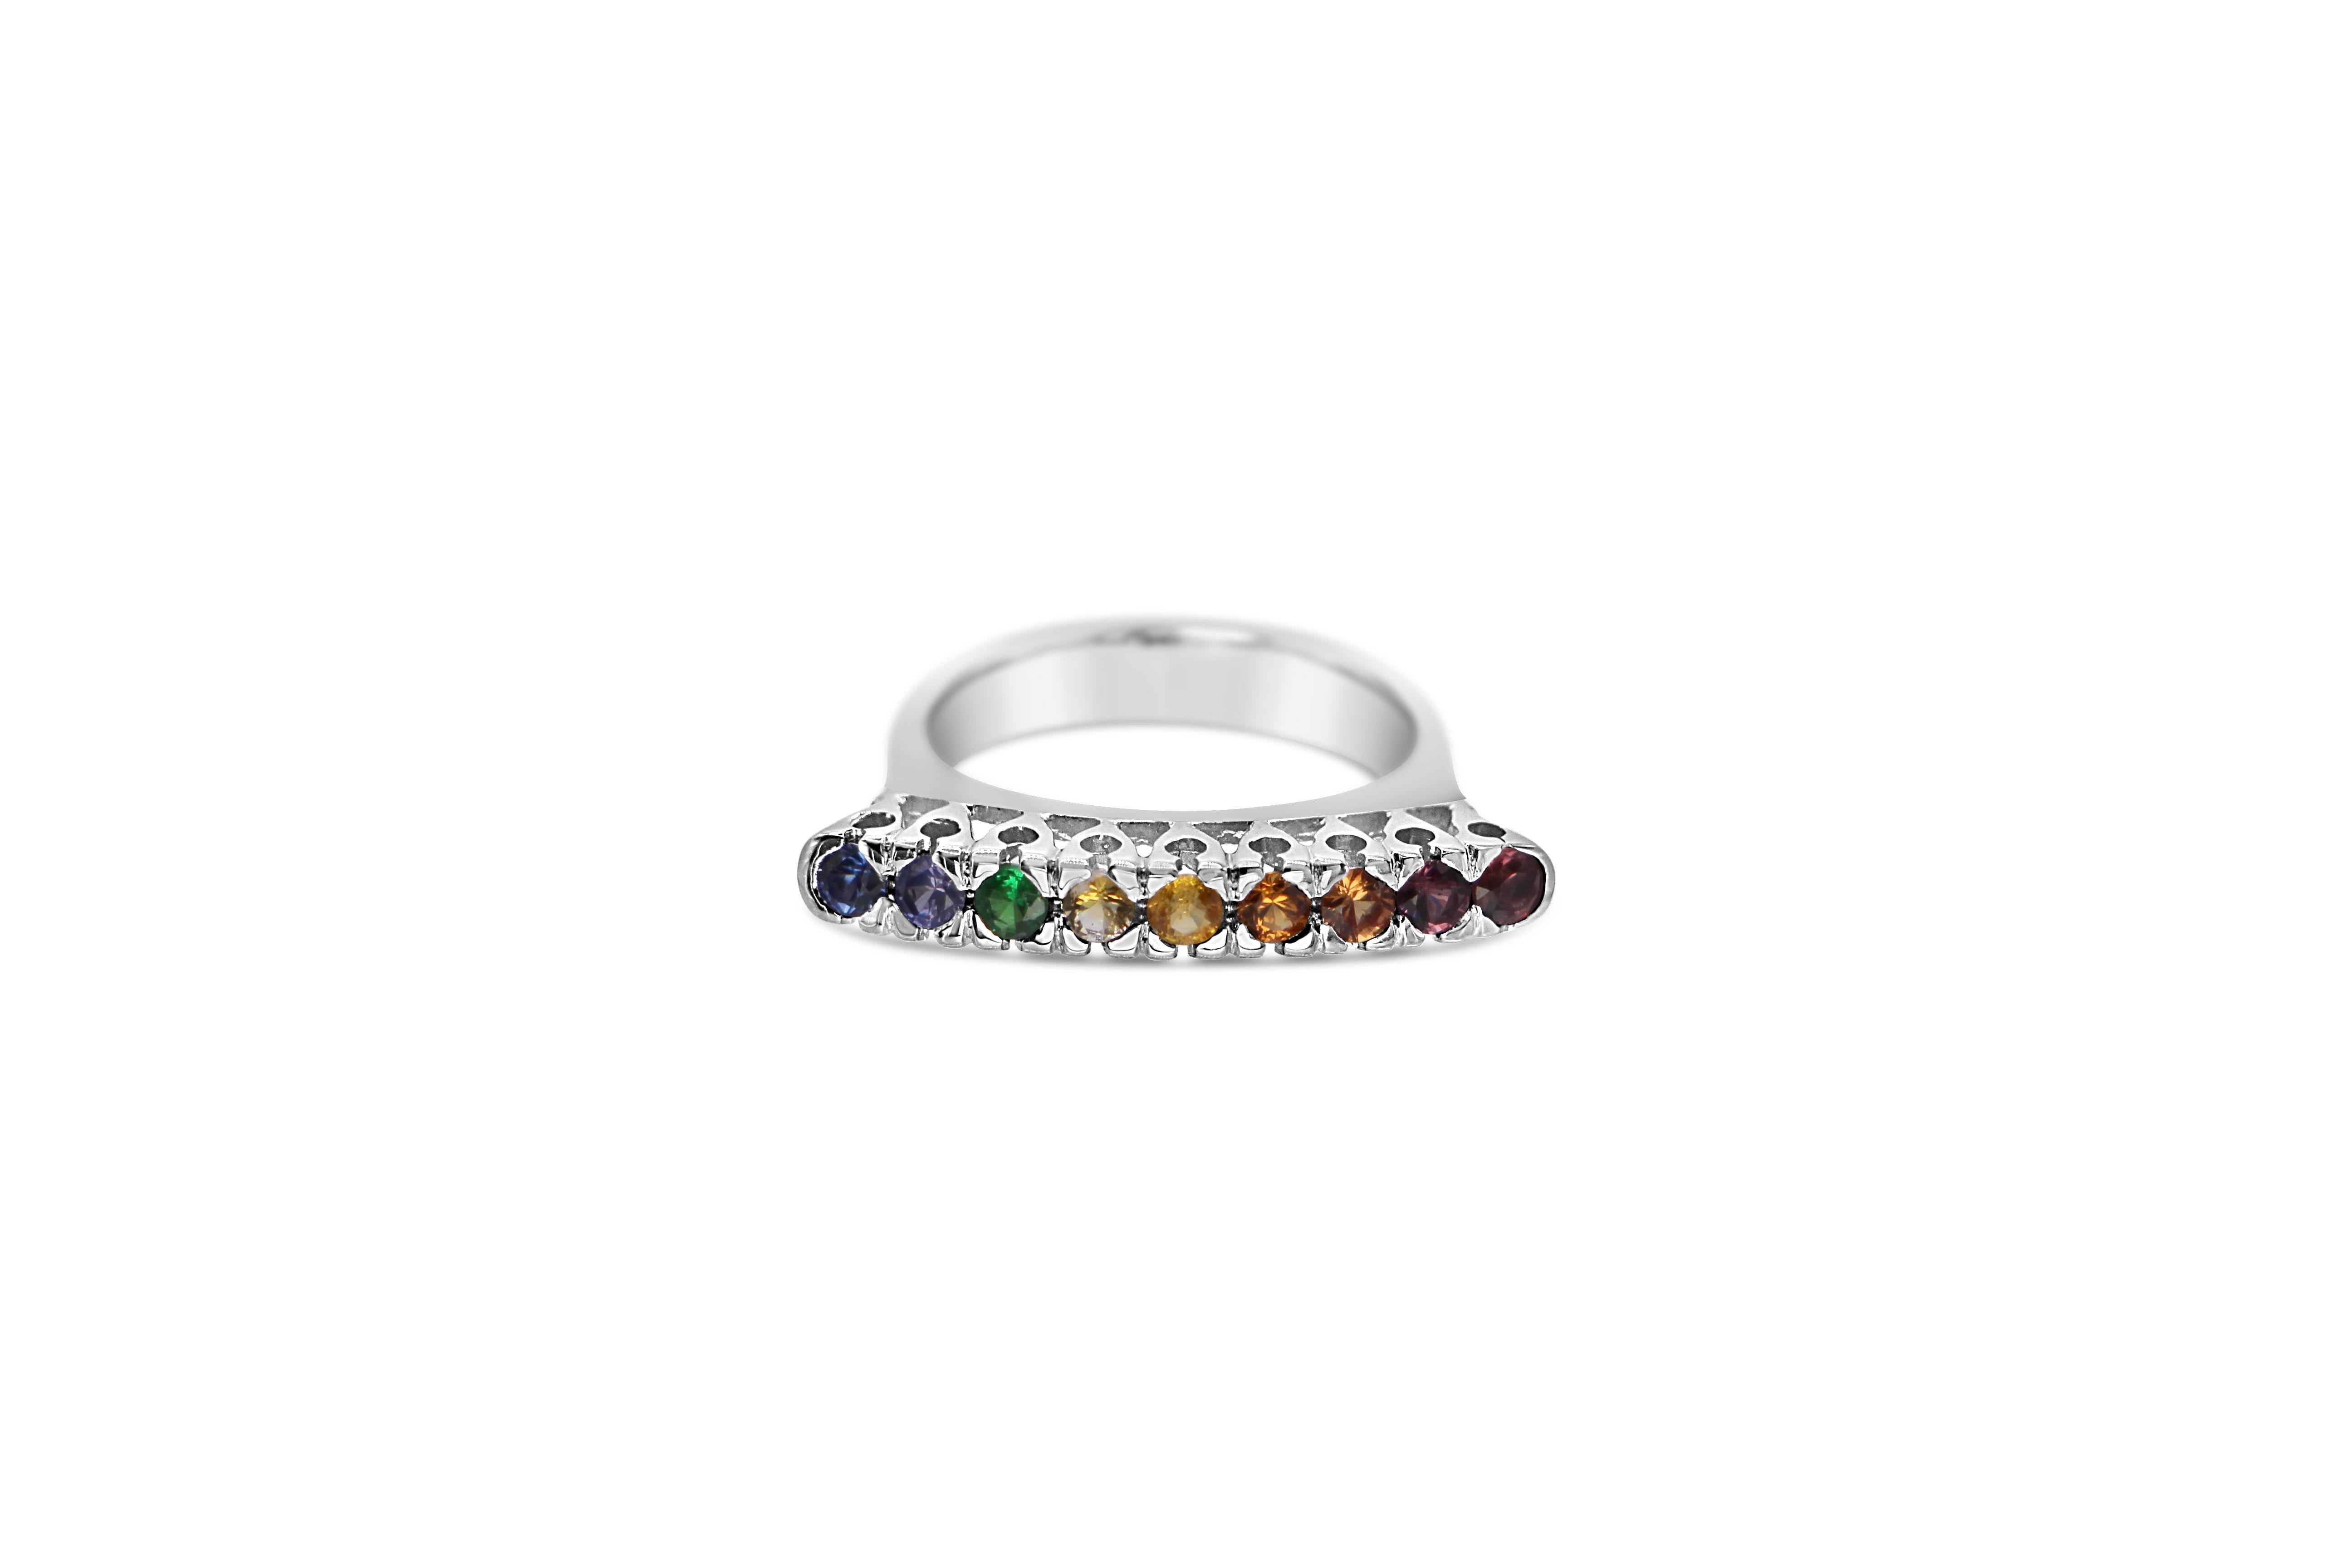 Rainbow Eternity Ring Sapphire Emerald Citrine and more Precious Stones, in 18Kt gold.
The precious stones in this handcrafted 18Kt white gold ring have the prong setting which is very safe for the ring, and gives a very beautiful and sparkling